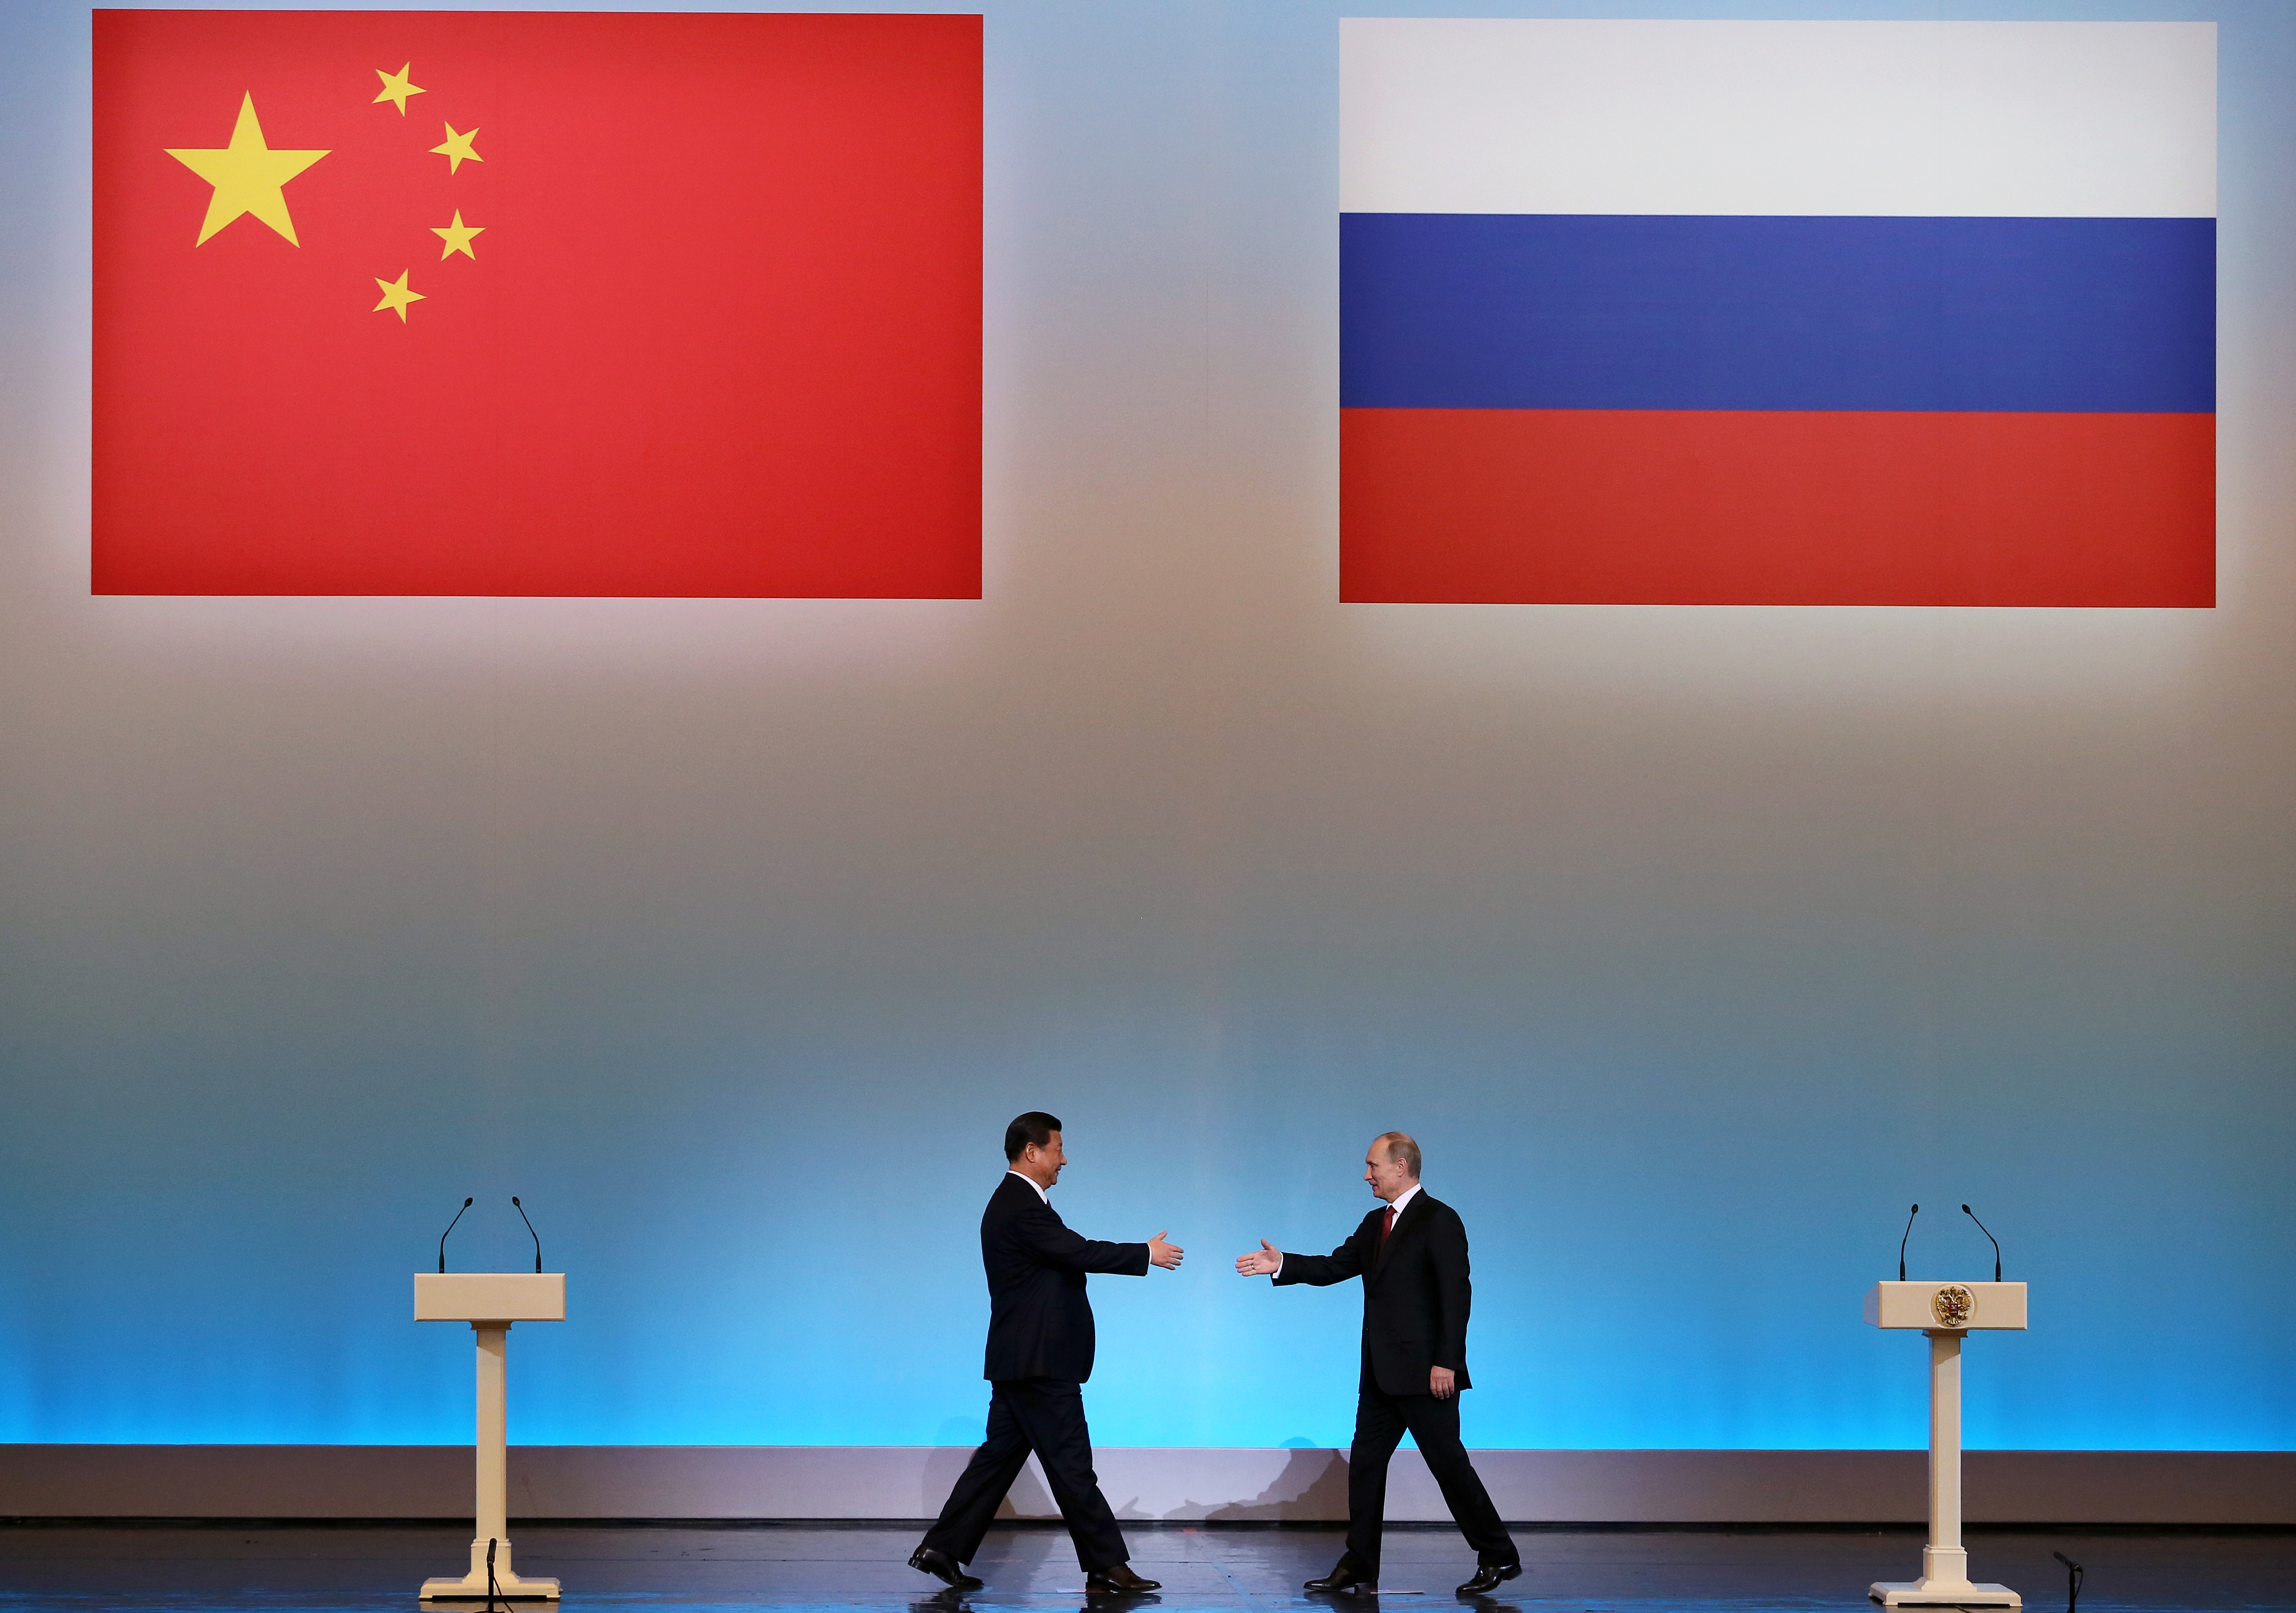 The Chinese and Russian flags